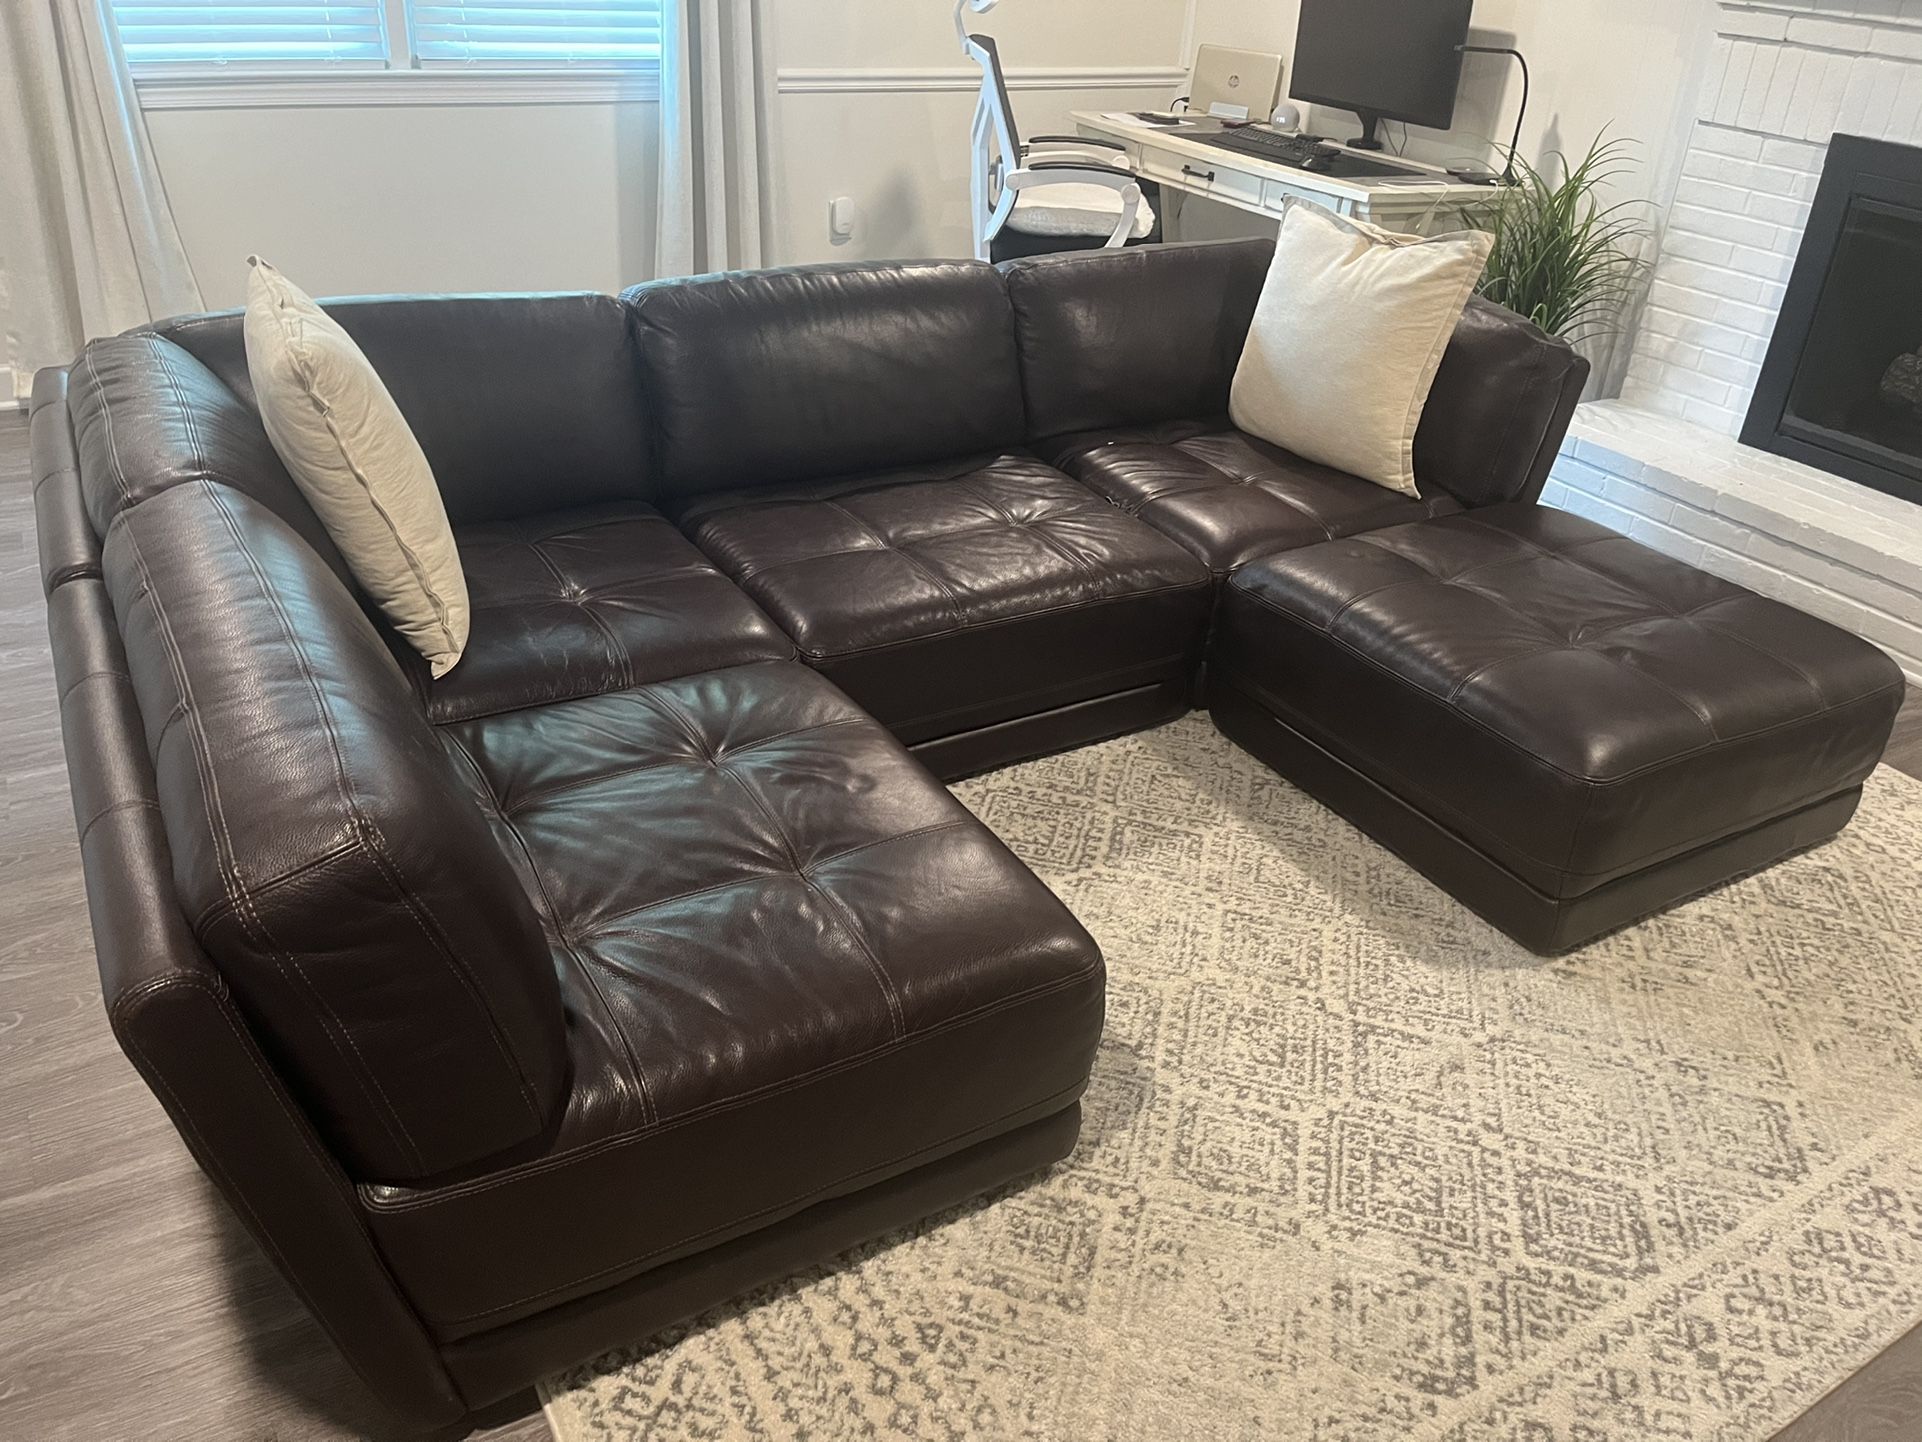 6 PIECE SECTIONAL LEATHER COUCH 